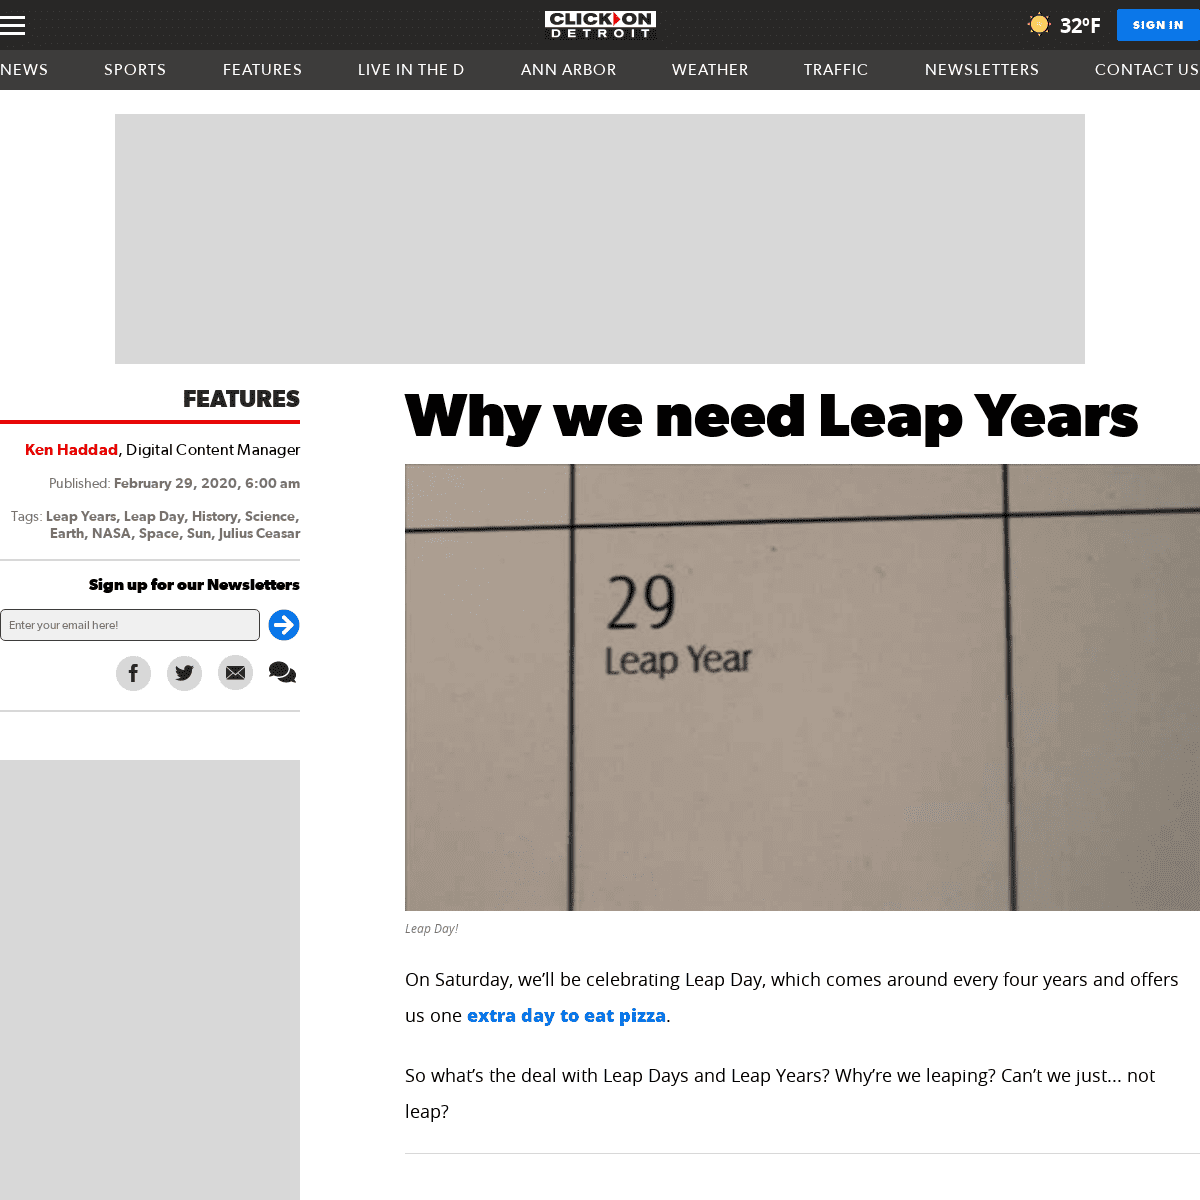 A complete backup of www.clickondetroit.com/features/2020/02/29/why-we-need-leap-years/